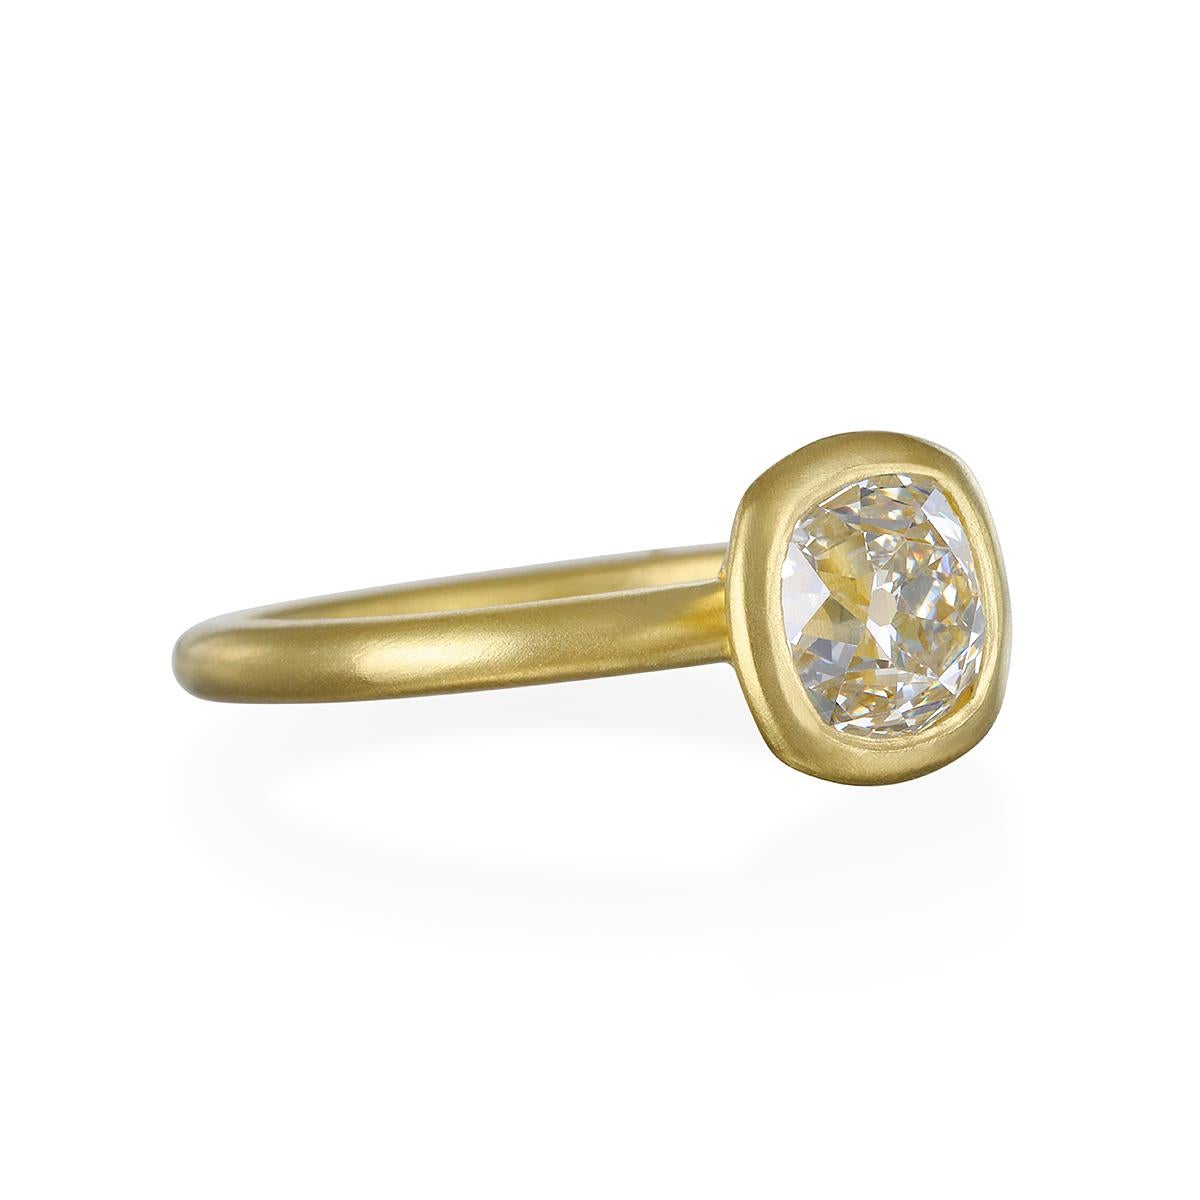 Faye Kim's Old European Cut Cushion Diamond Ring with an open bezel in 18 karat gold with a matte finish;
can be beautifully stacked and mix and match for a custom look.

Size 7  Ring can be sized.
Diamond: Cushion Cut 1.40 Carats 
Quality: J-K